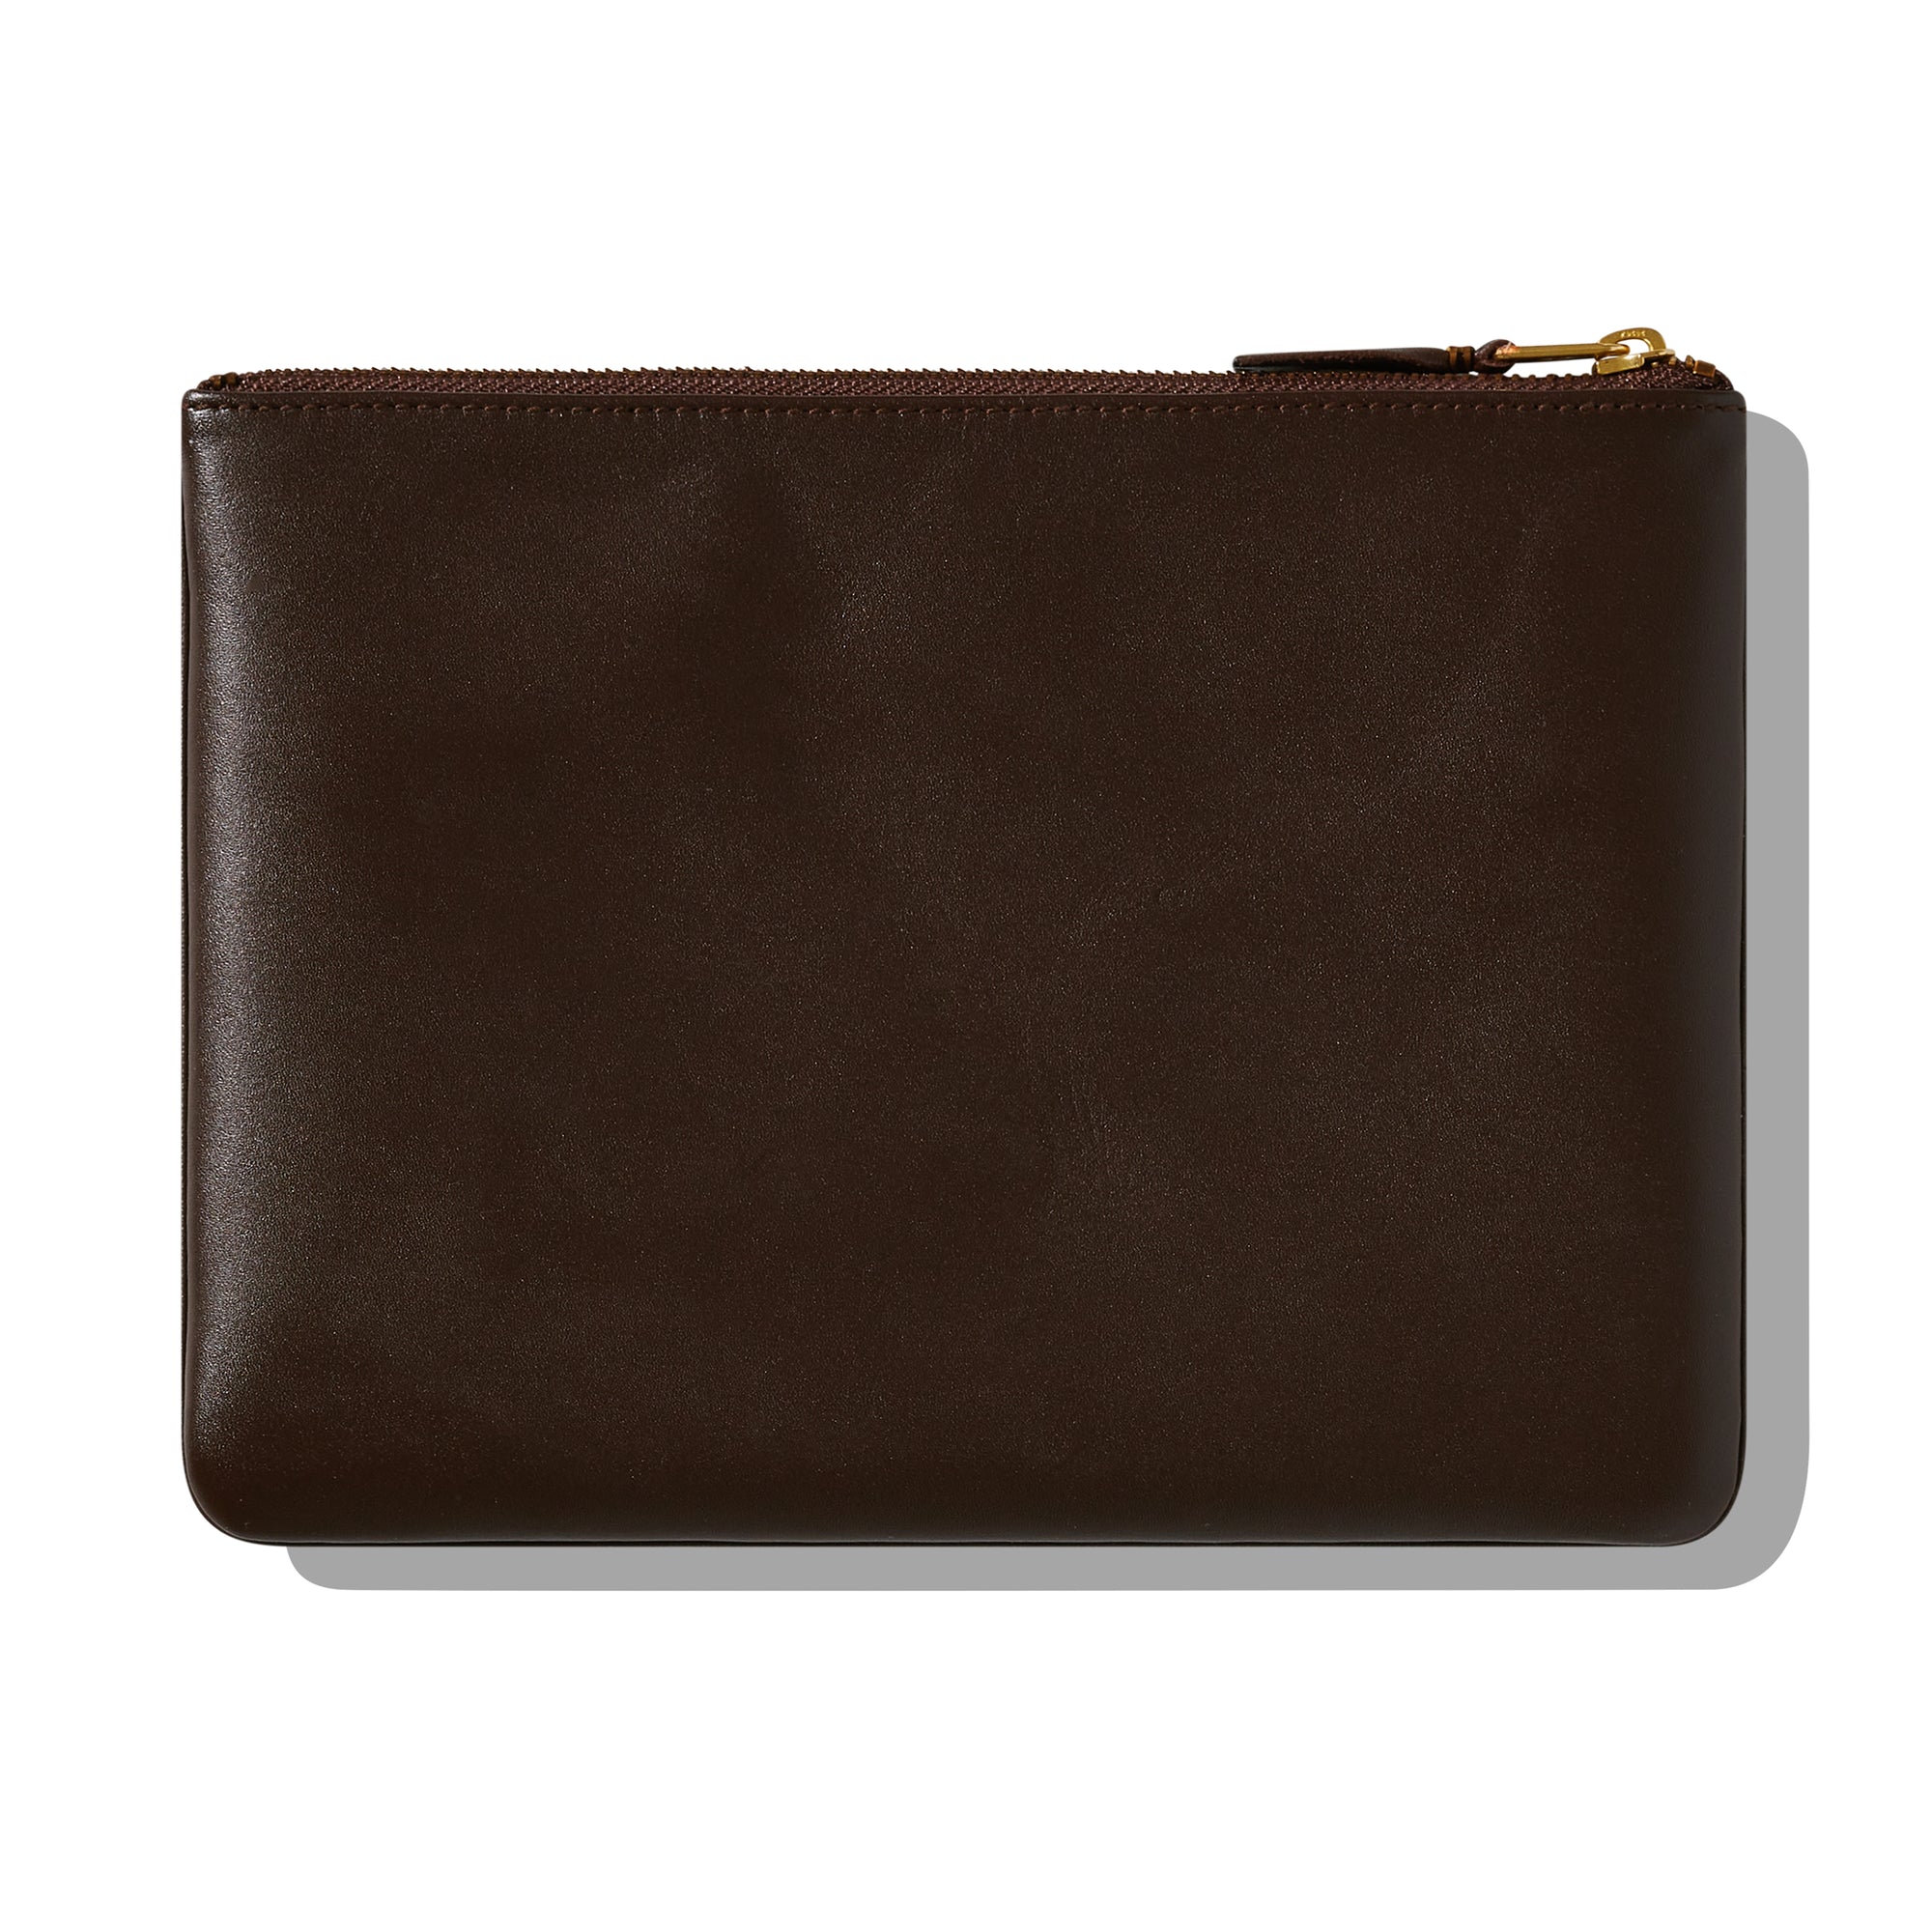 CDG Wallet - Classic Leather Zip Pouch - (Brown SA5100) view 2